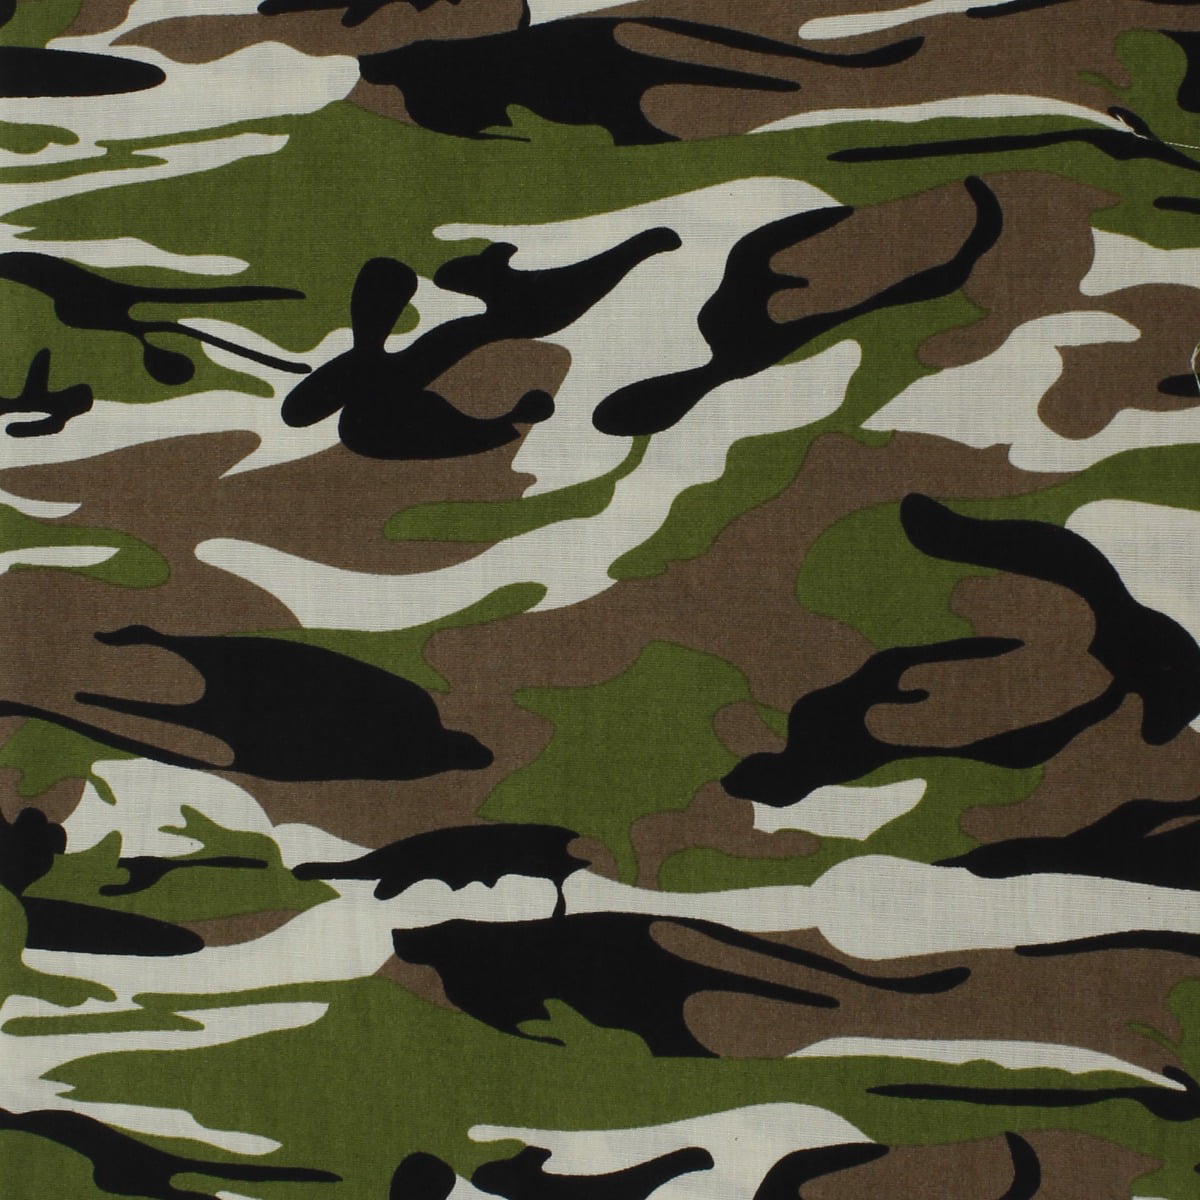 Army Camo Camouflage Cotton Quilt Fabric Fat Quarter Green Brown 18x29” Wide 